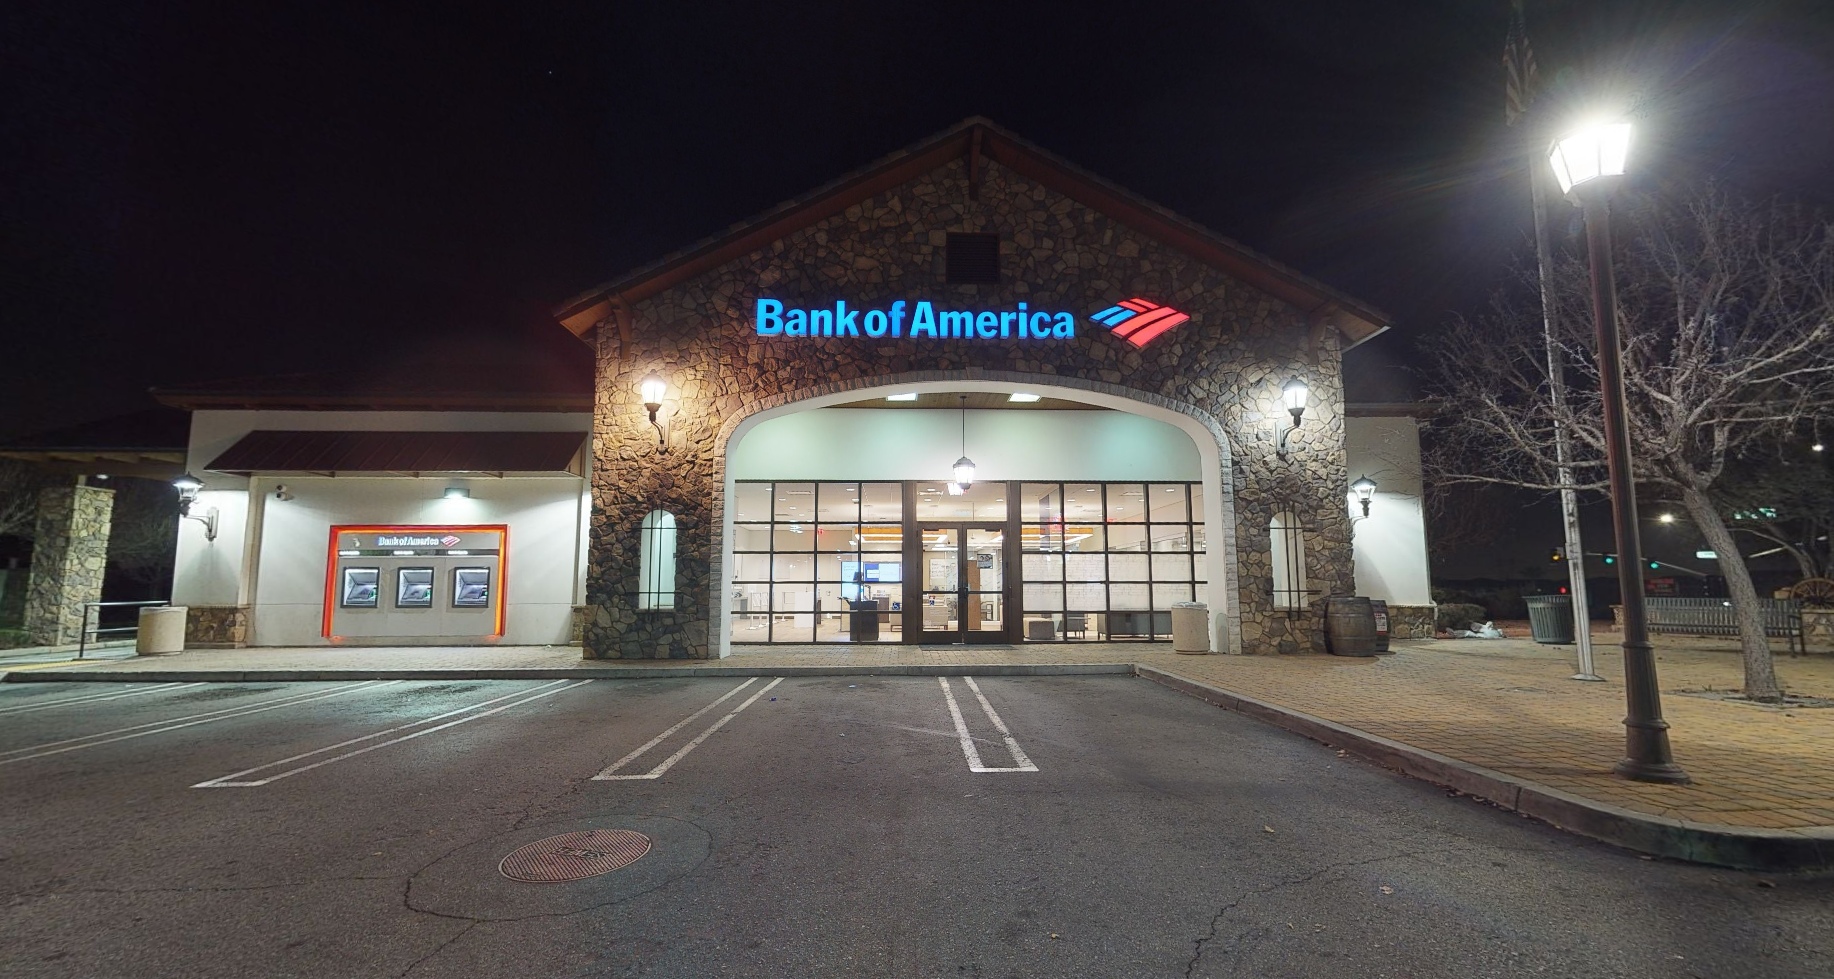 Bank of America financial center with drive-thru ATM | 7387 Day Creek Blvd, Rancho Cucamonga, CA 91739